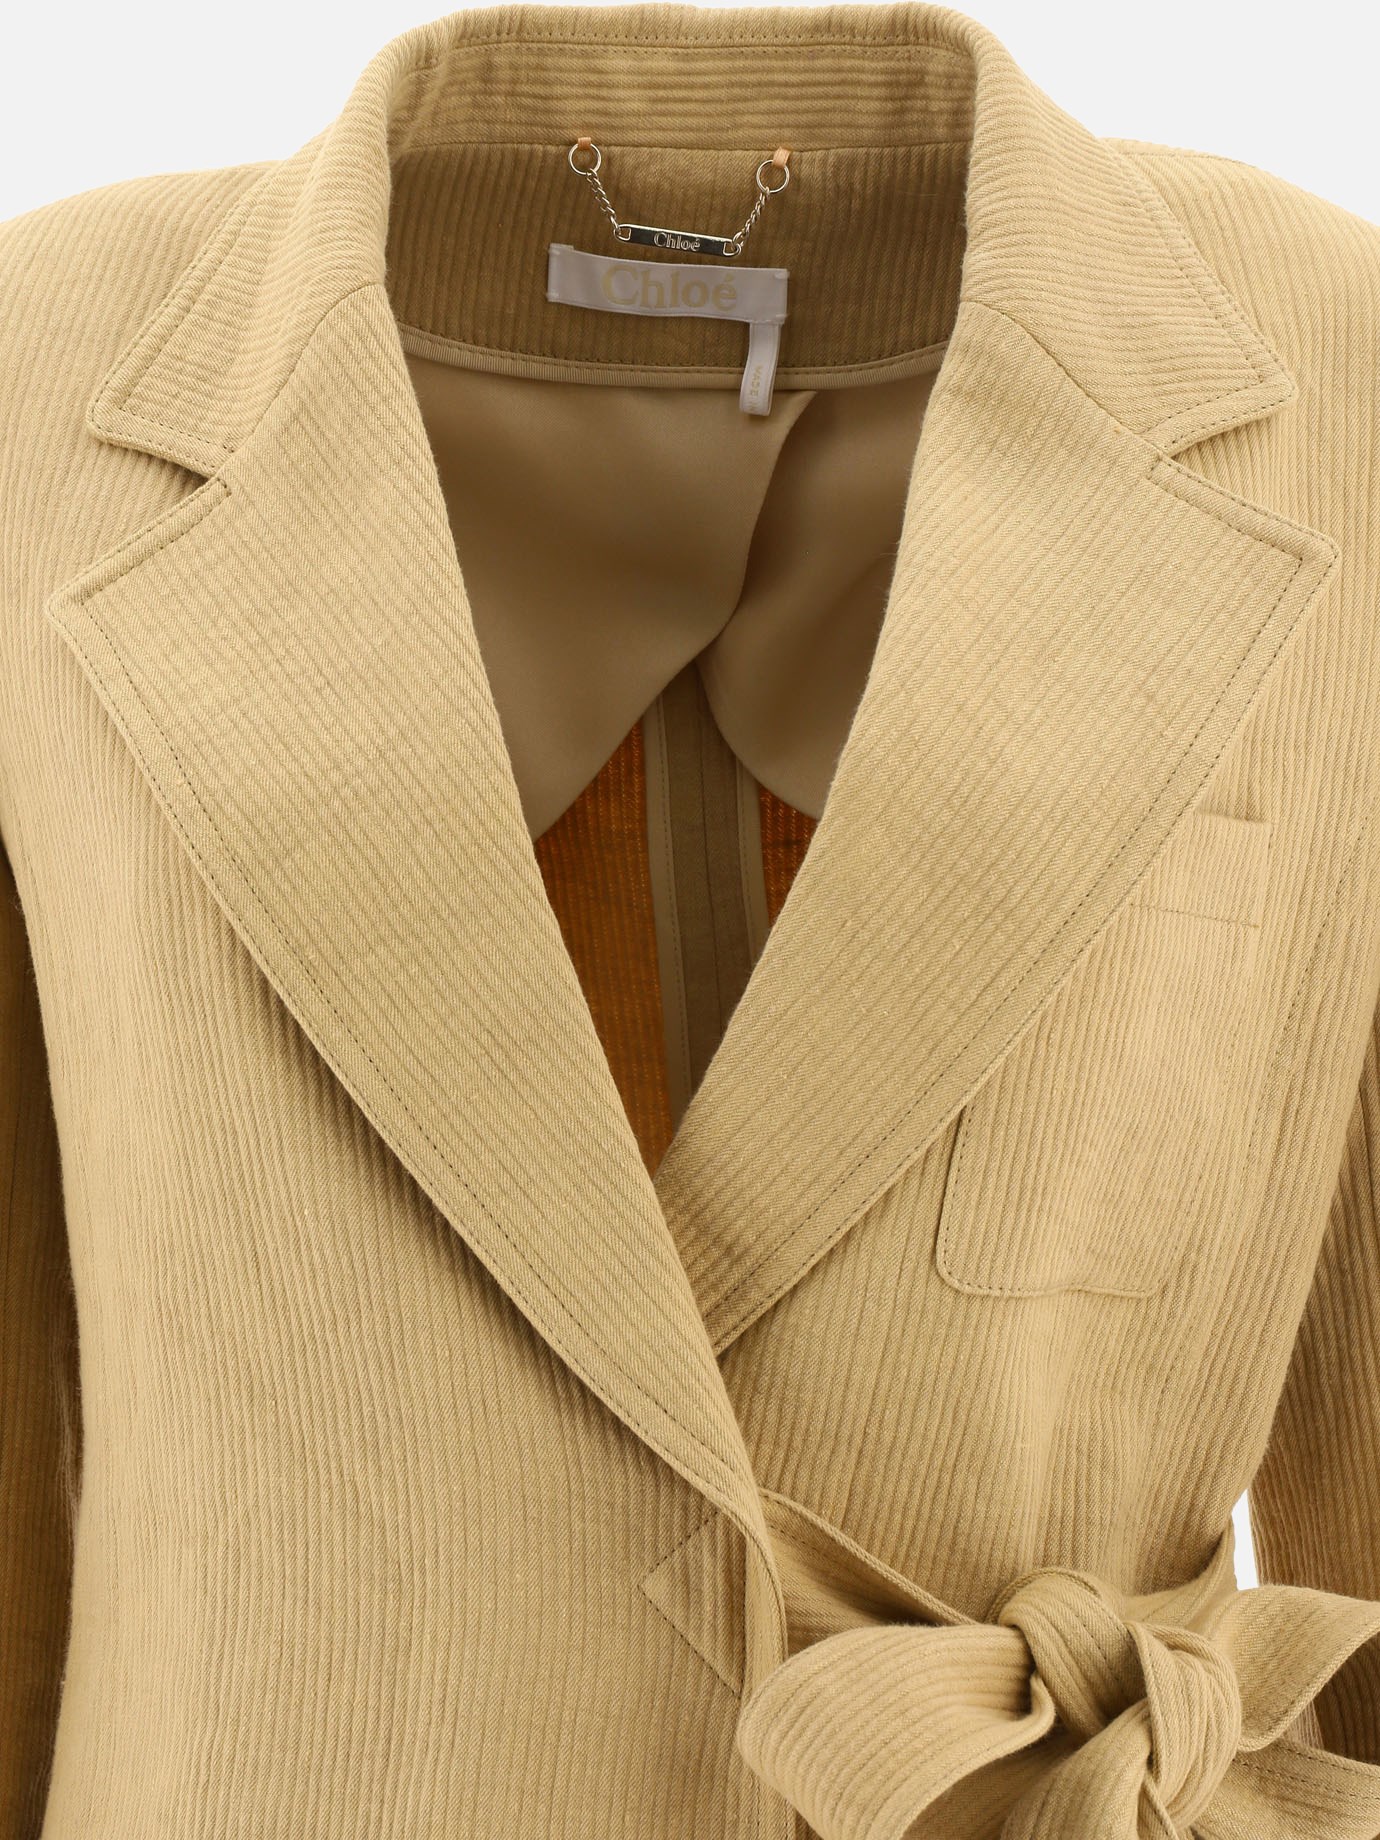 Ribbed jacket with belt by Chloé